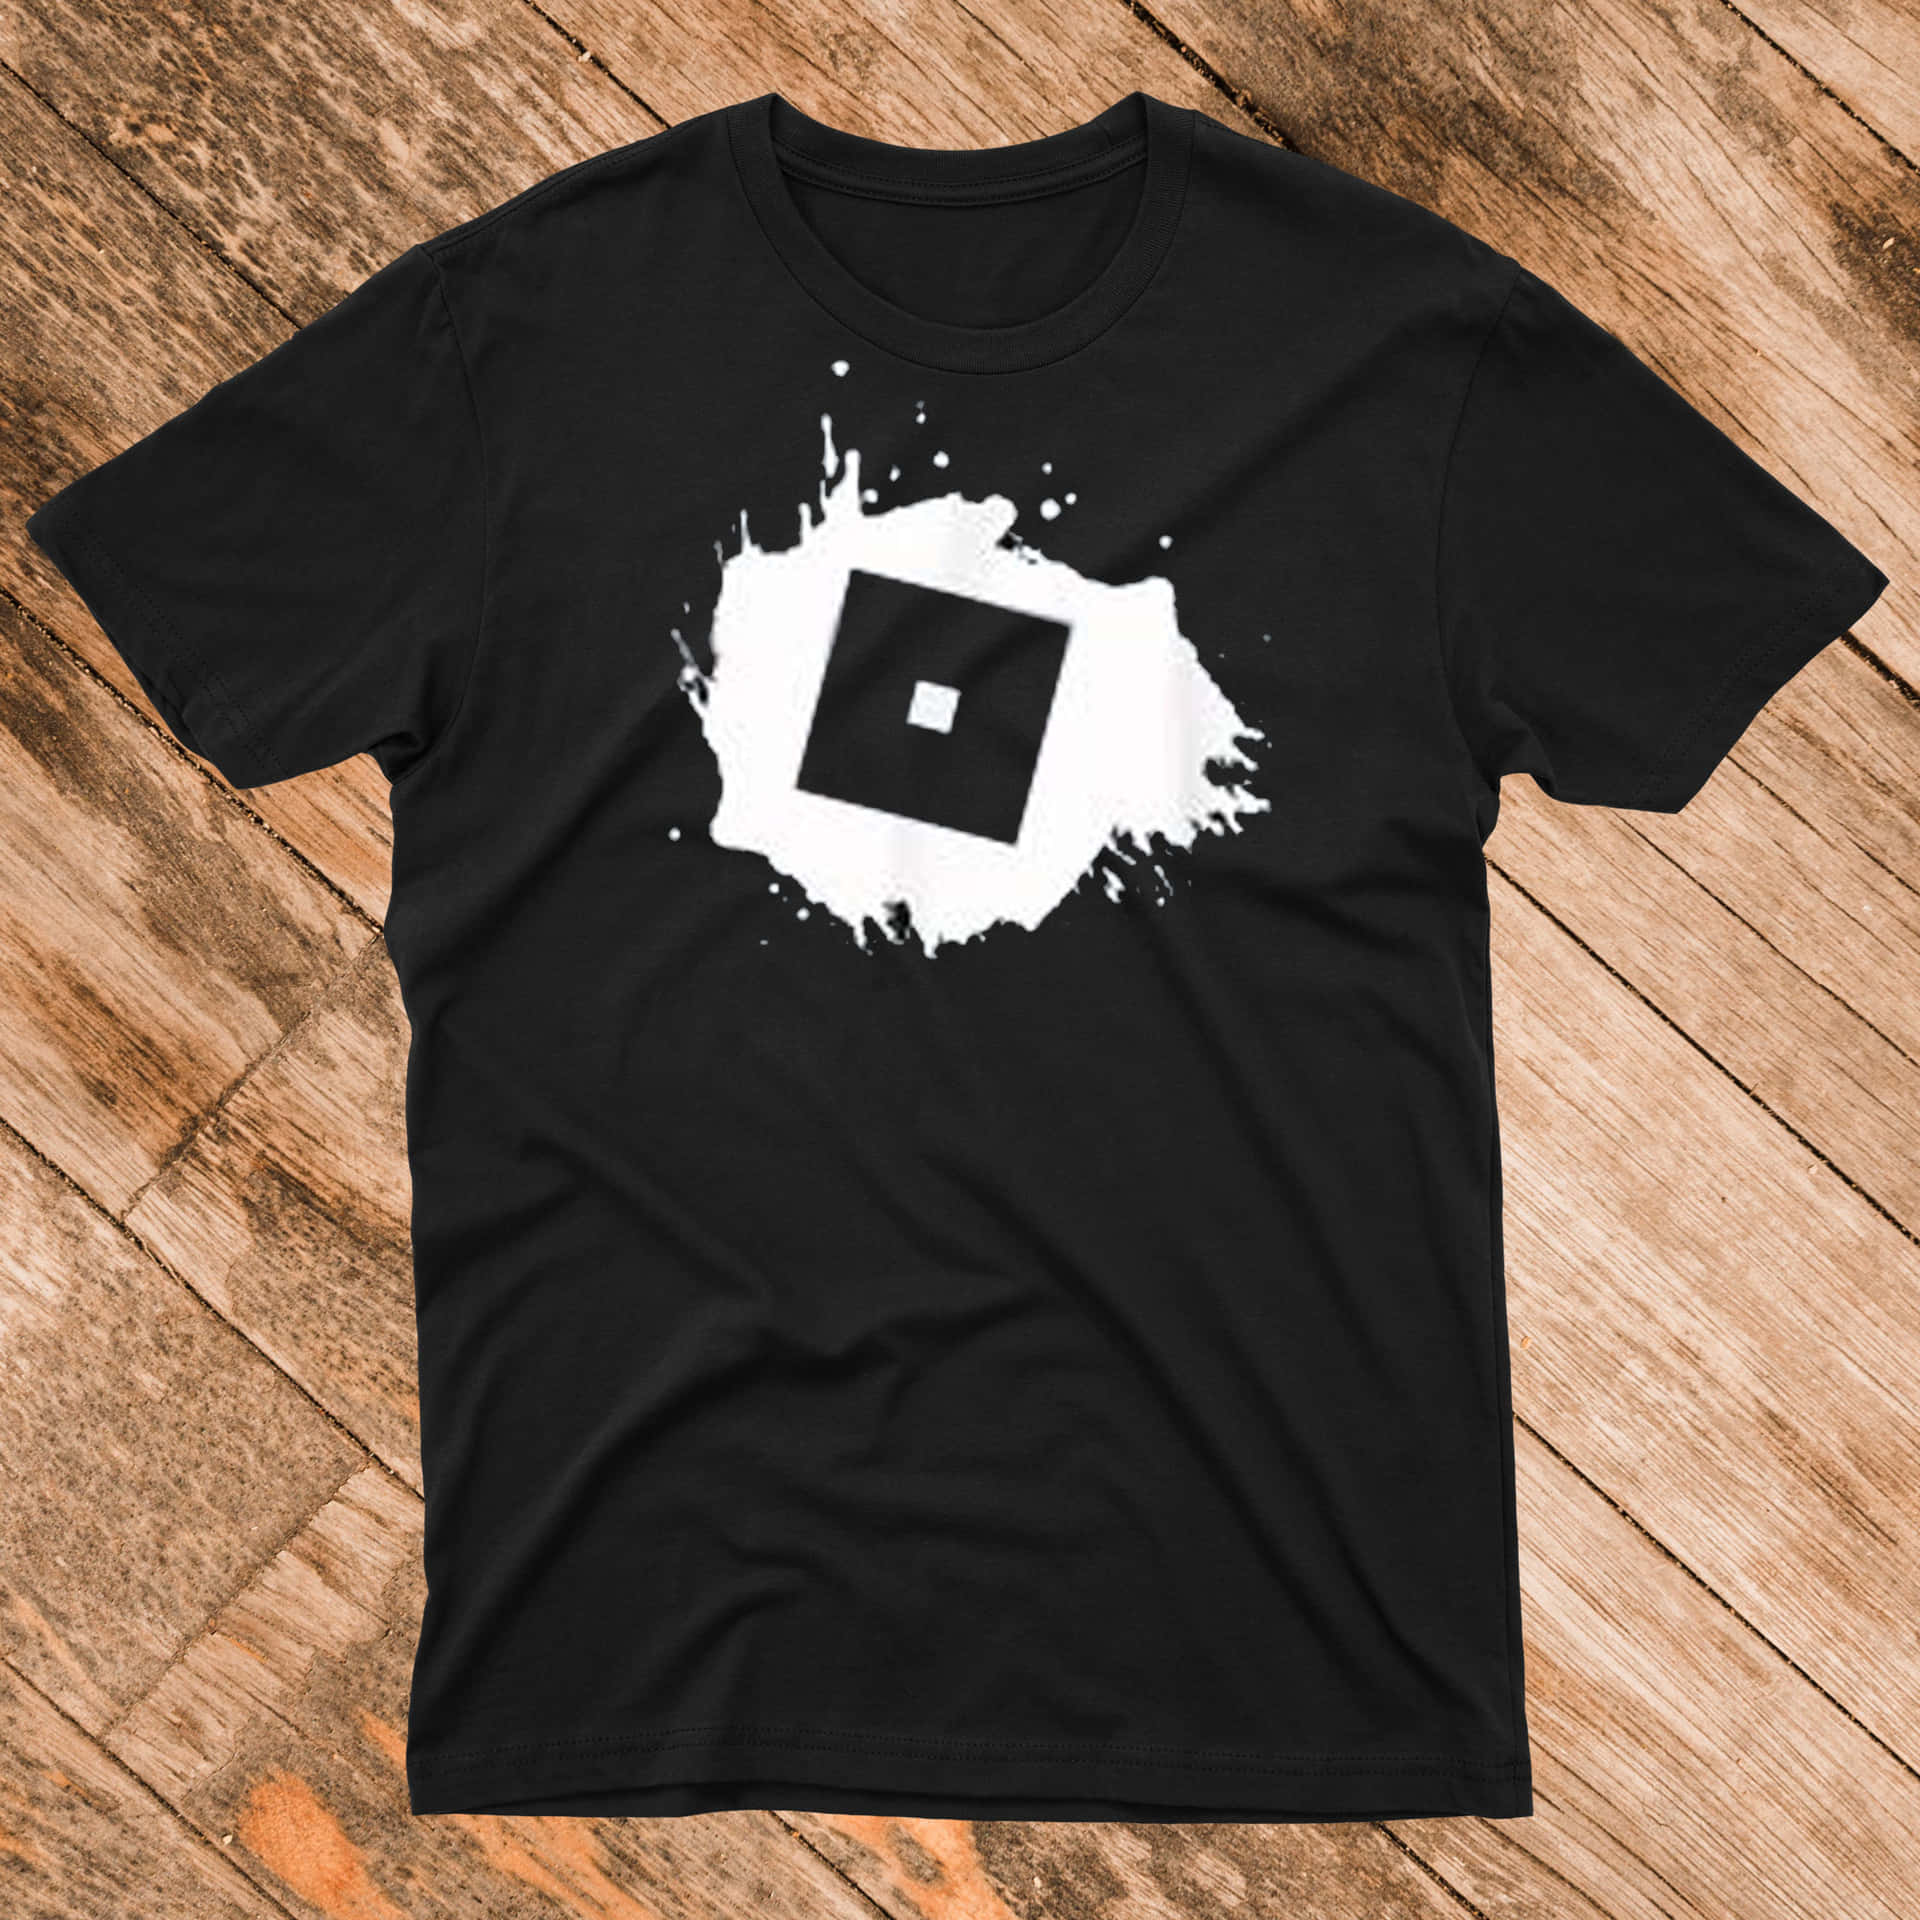 A Black T - Shirt With A Square On It